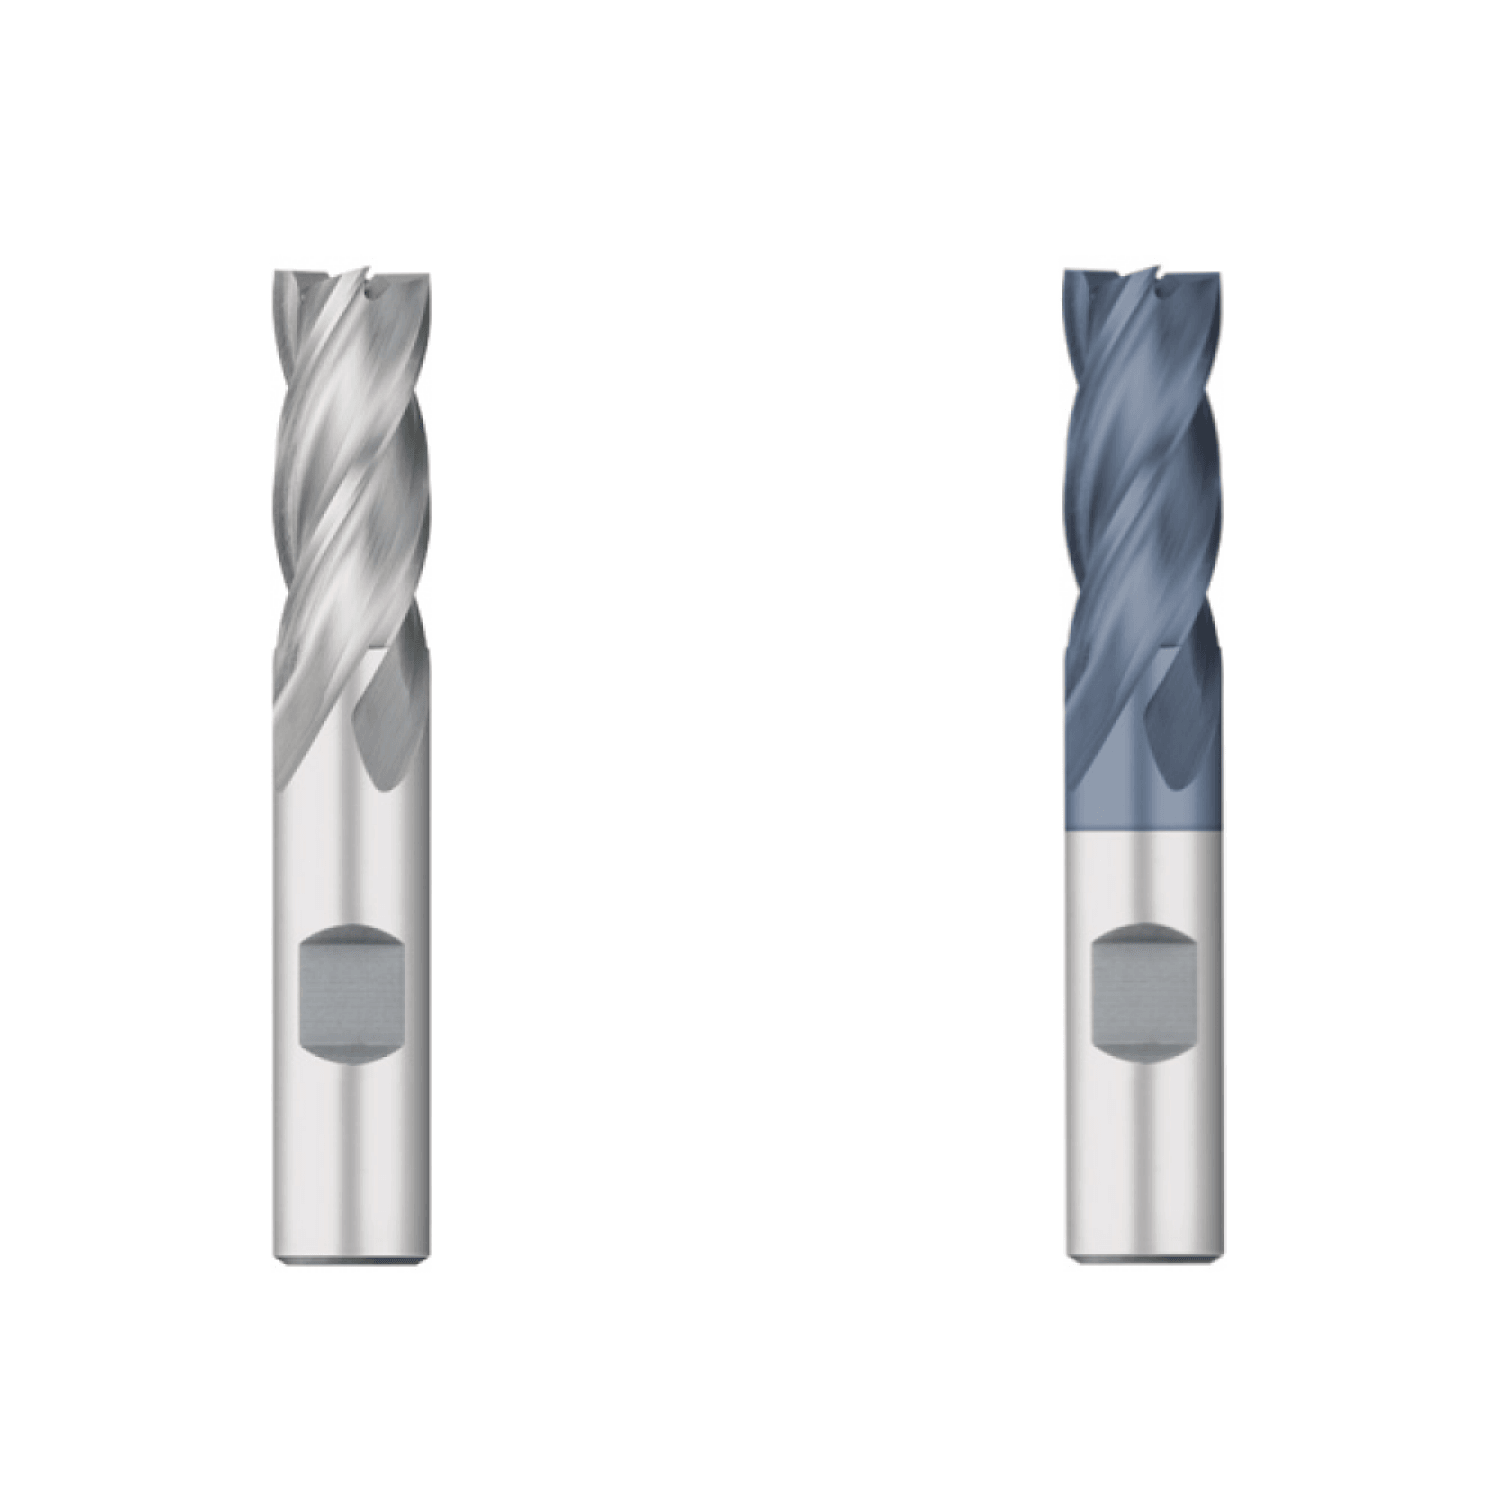 2" x 2" LOC (2 Pack) HSS 4 Flute End Mills (1-1/4" Shanks) - The End Mill Store 